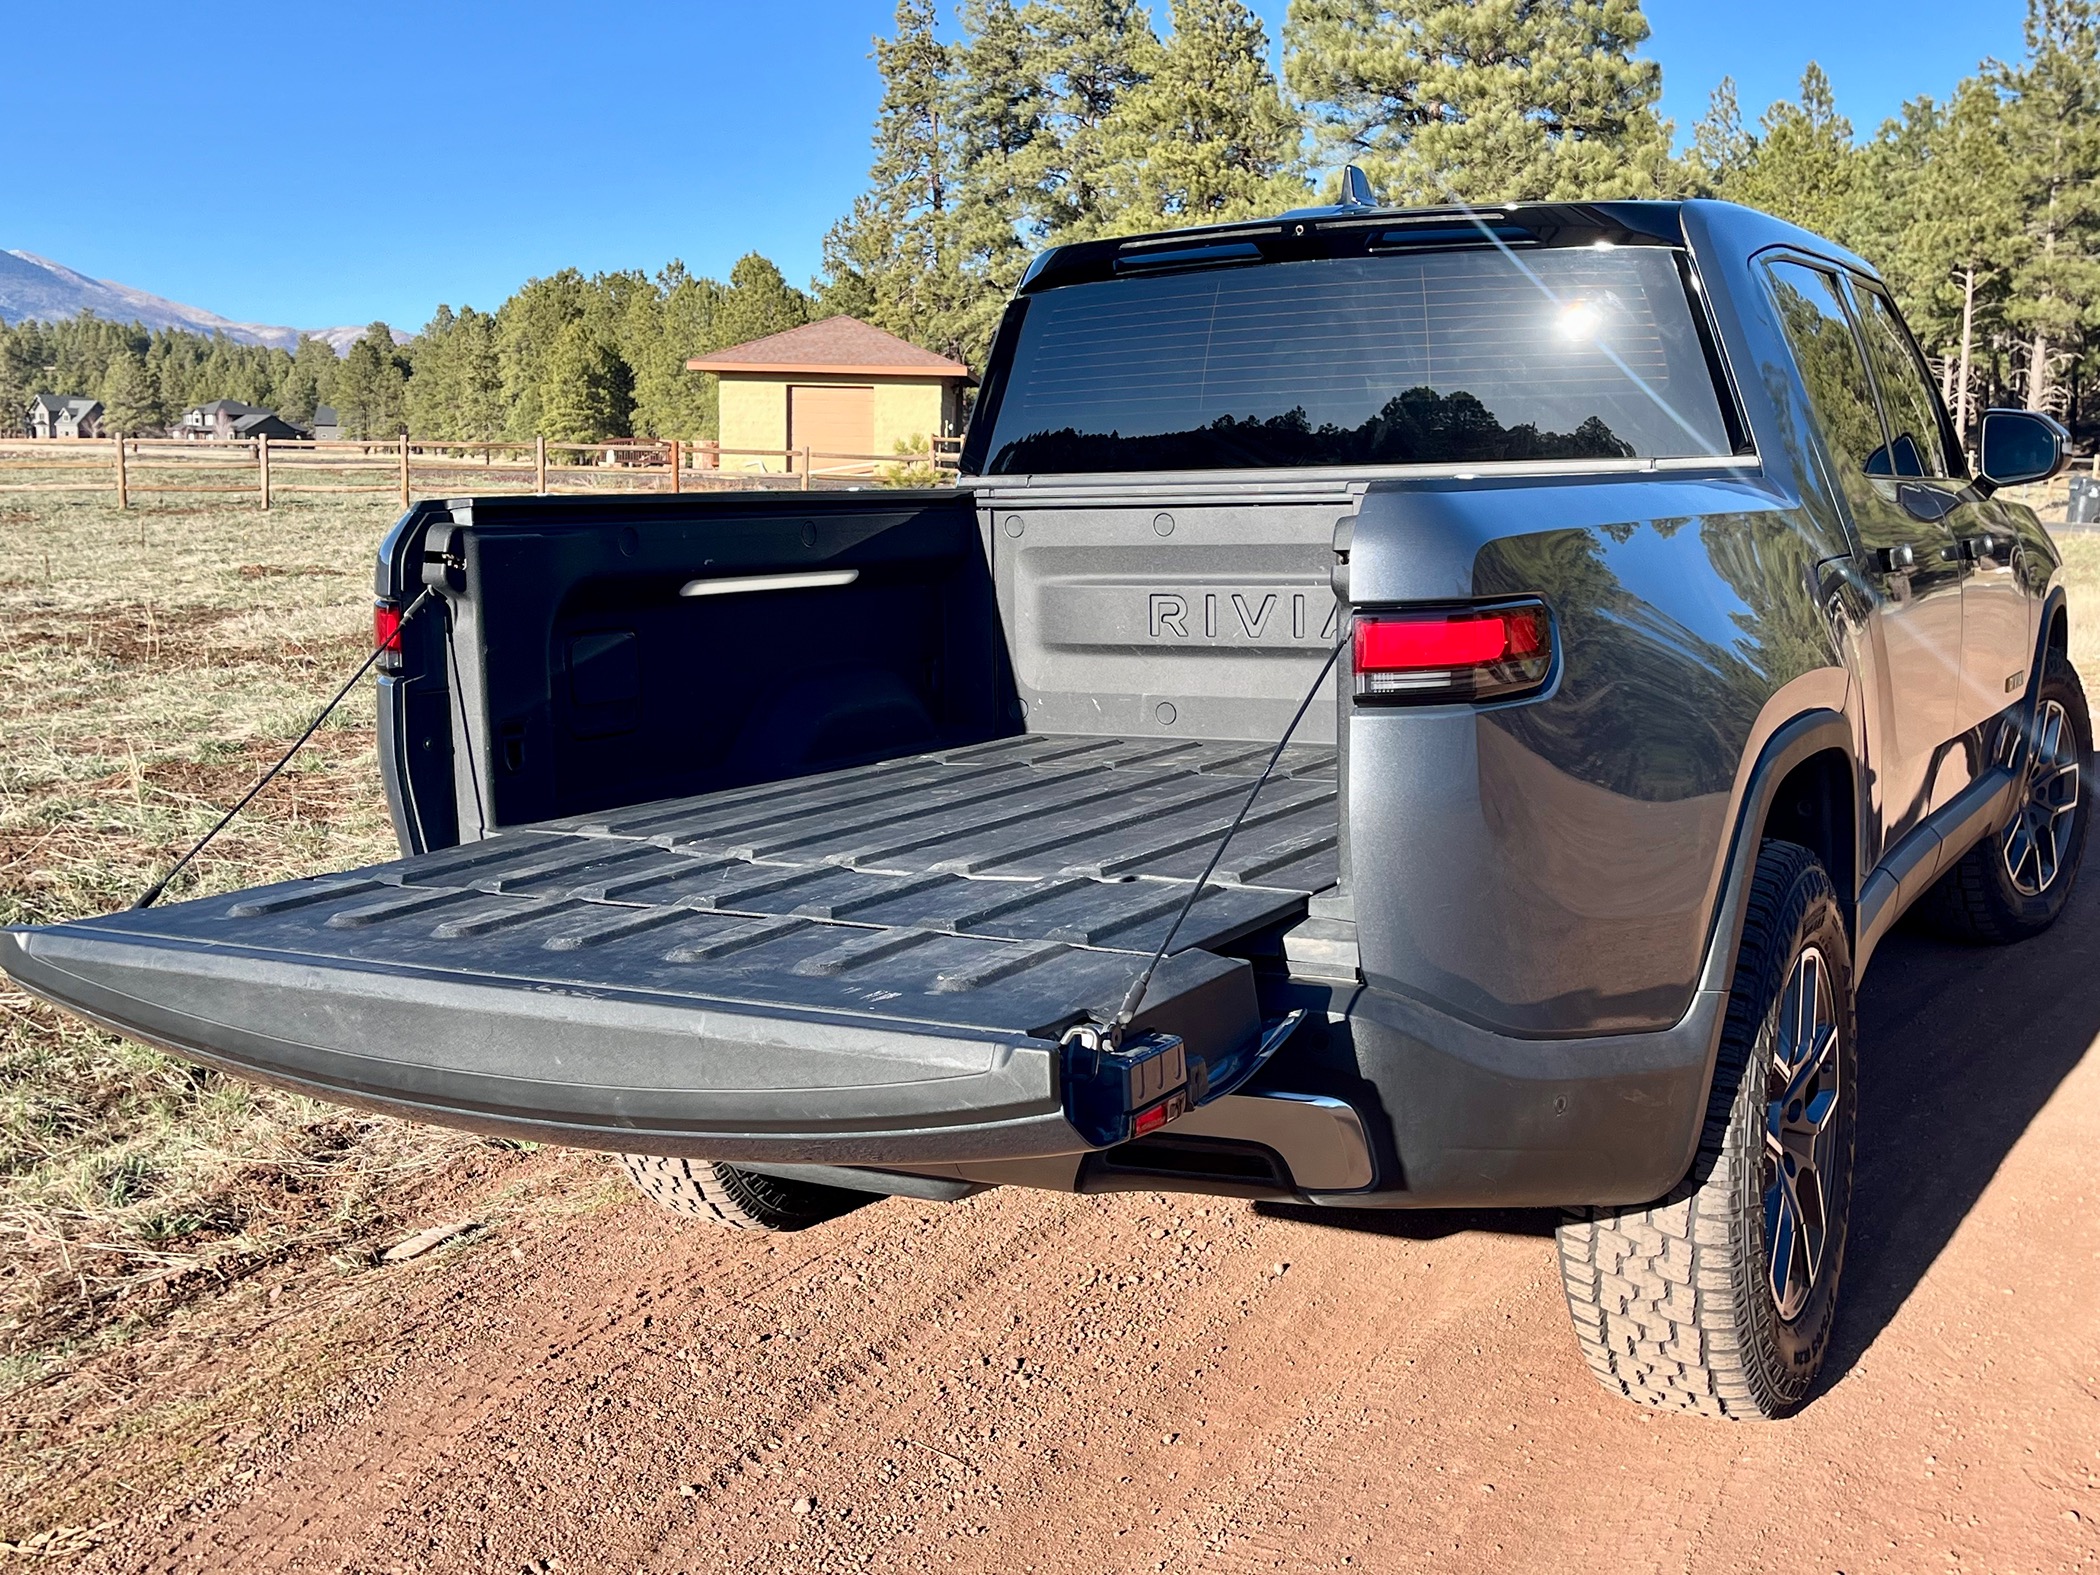 Rivian R1T R1S FOR SALE: 22 R1T LE - El Cap - Quad Motor - Lrg Pack - 20" AT - 39k mi - Off Road Pkg - Lots of Accessories and Aftermarket Upgrades - $60K IMG_6906